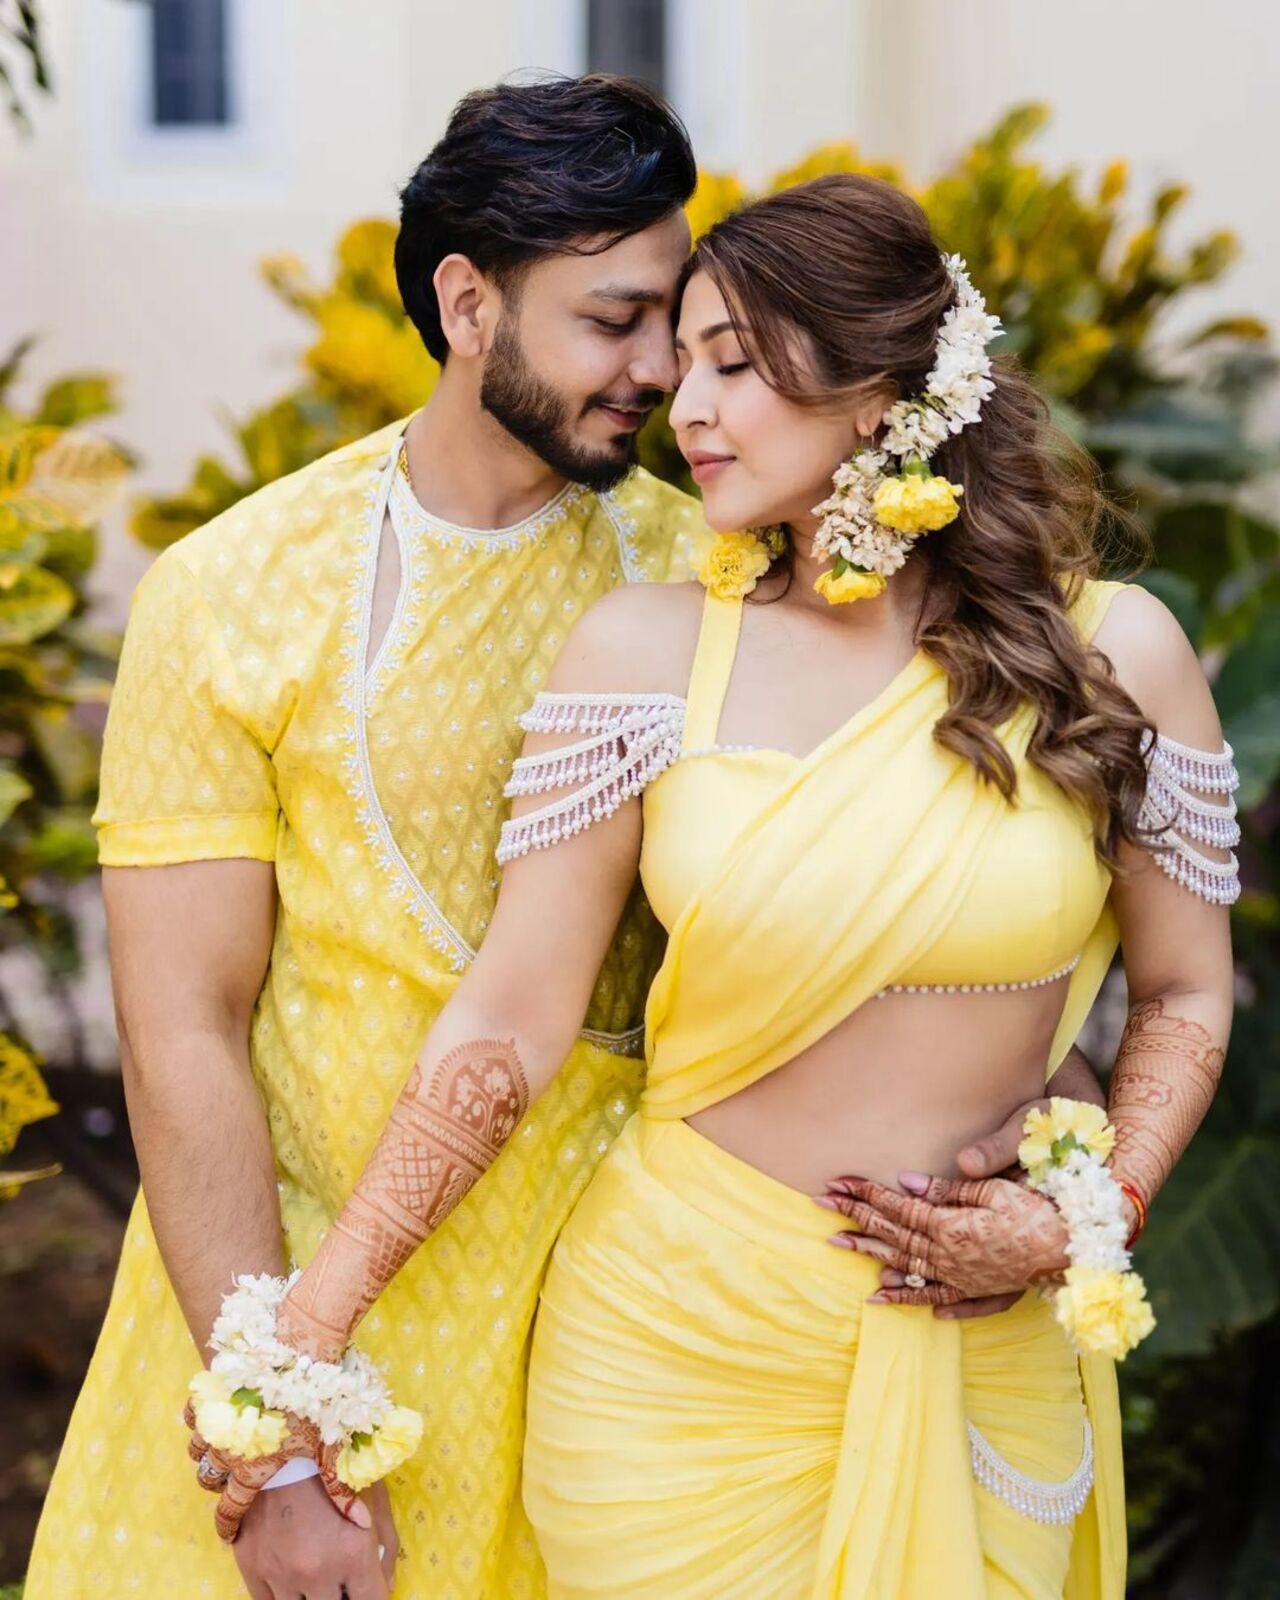 For the haldi ceremony, Sonarika wore a pre-draped yellow saree with pearl blouse. For the jewellery she opted for floral ornaments, and kept her locks open